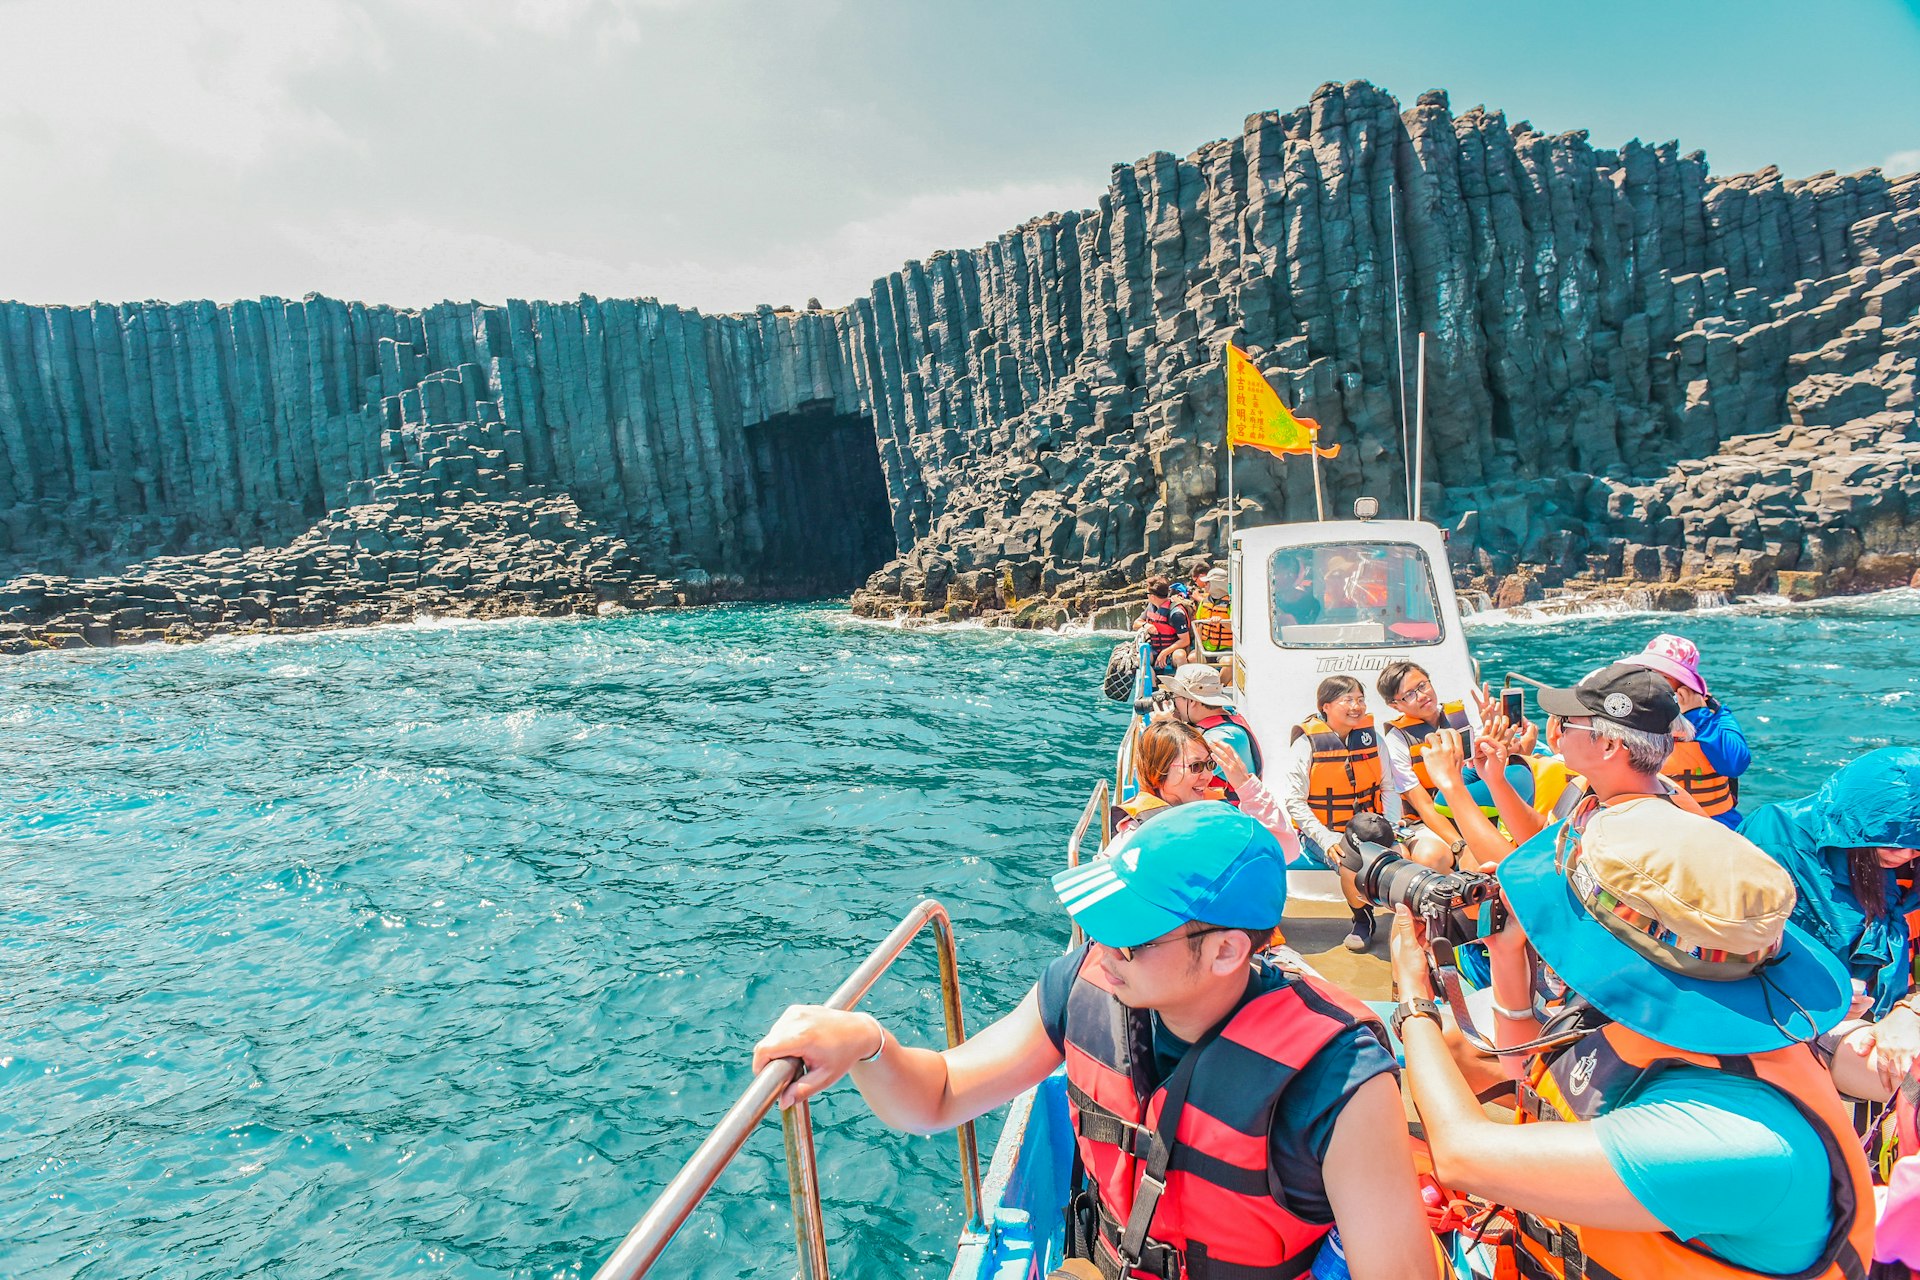 A boat loaded with tourists explores the natural stone features that line an island coastline